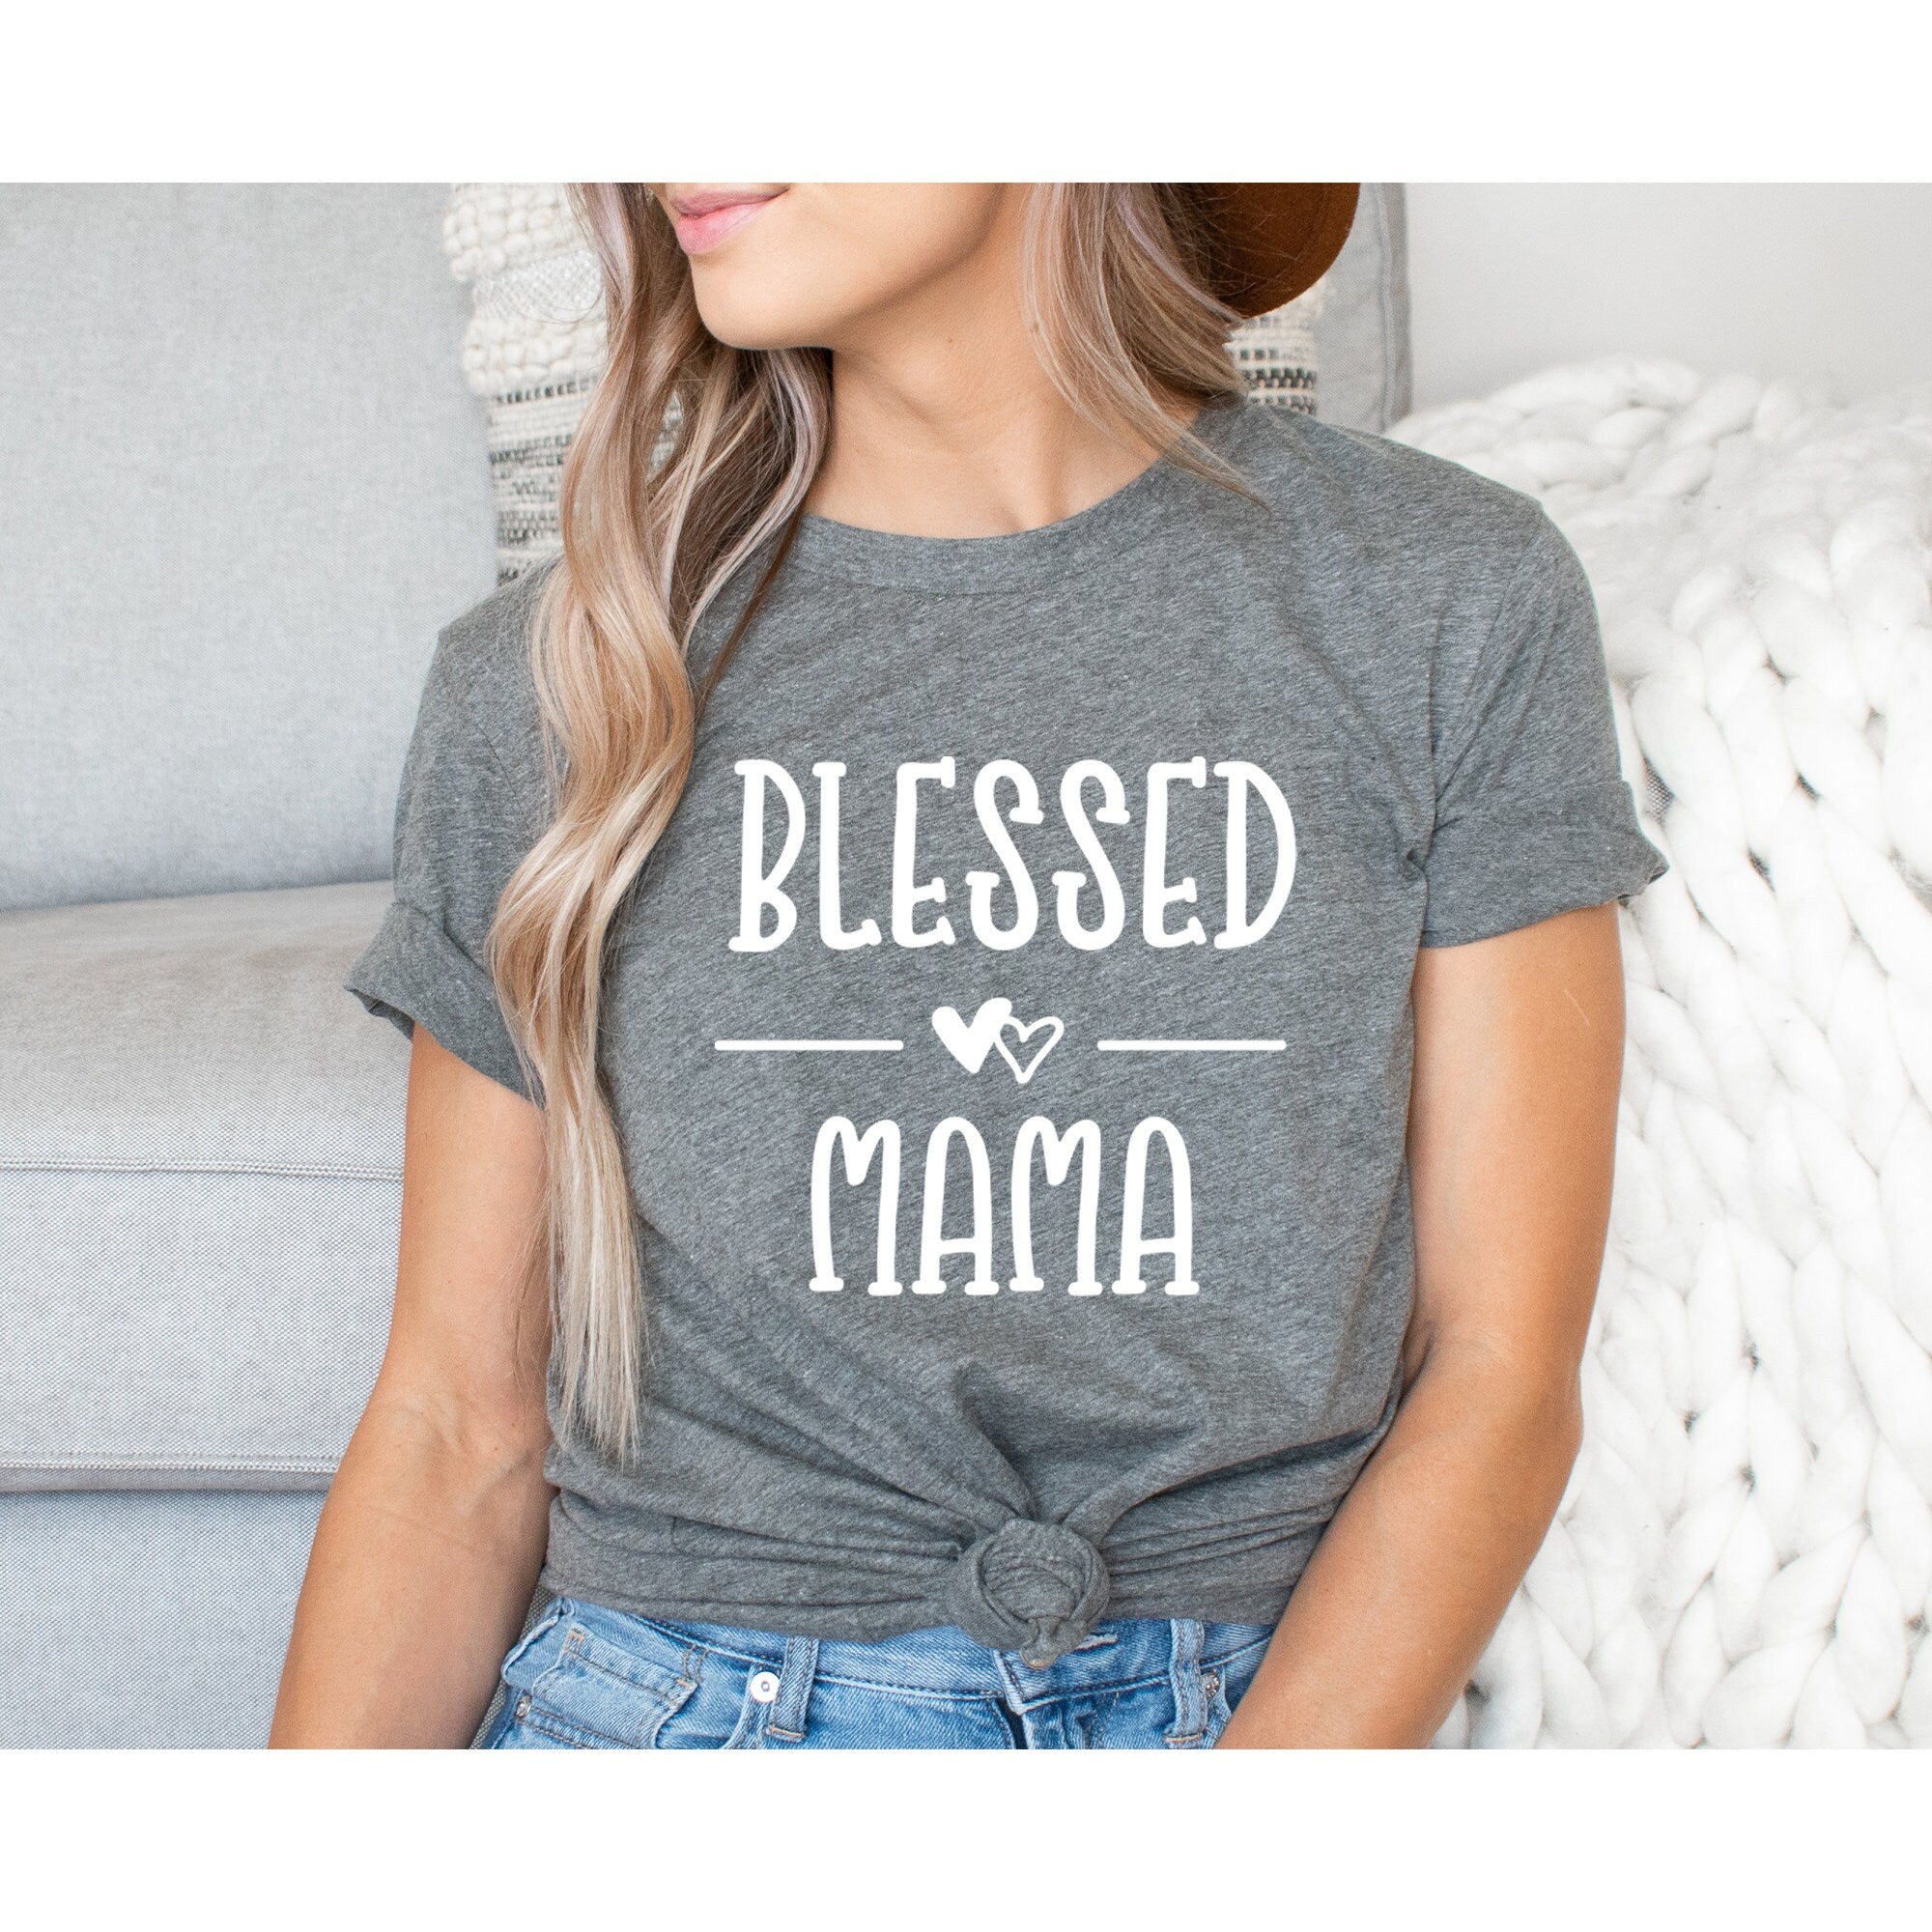 Mother's Day Gifts, Gift for Her, Mom Shirts, Mom-life Shirt, Shirts for Moms, Trendy Mom T-Shirts, Cool Mom Shirts, Shirts for Moms